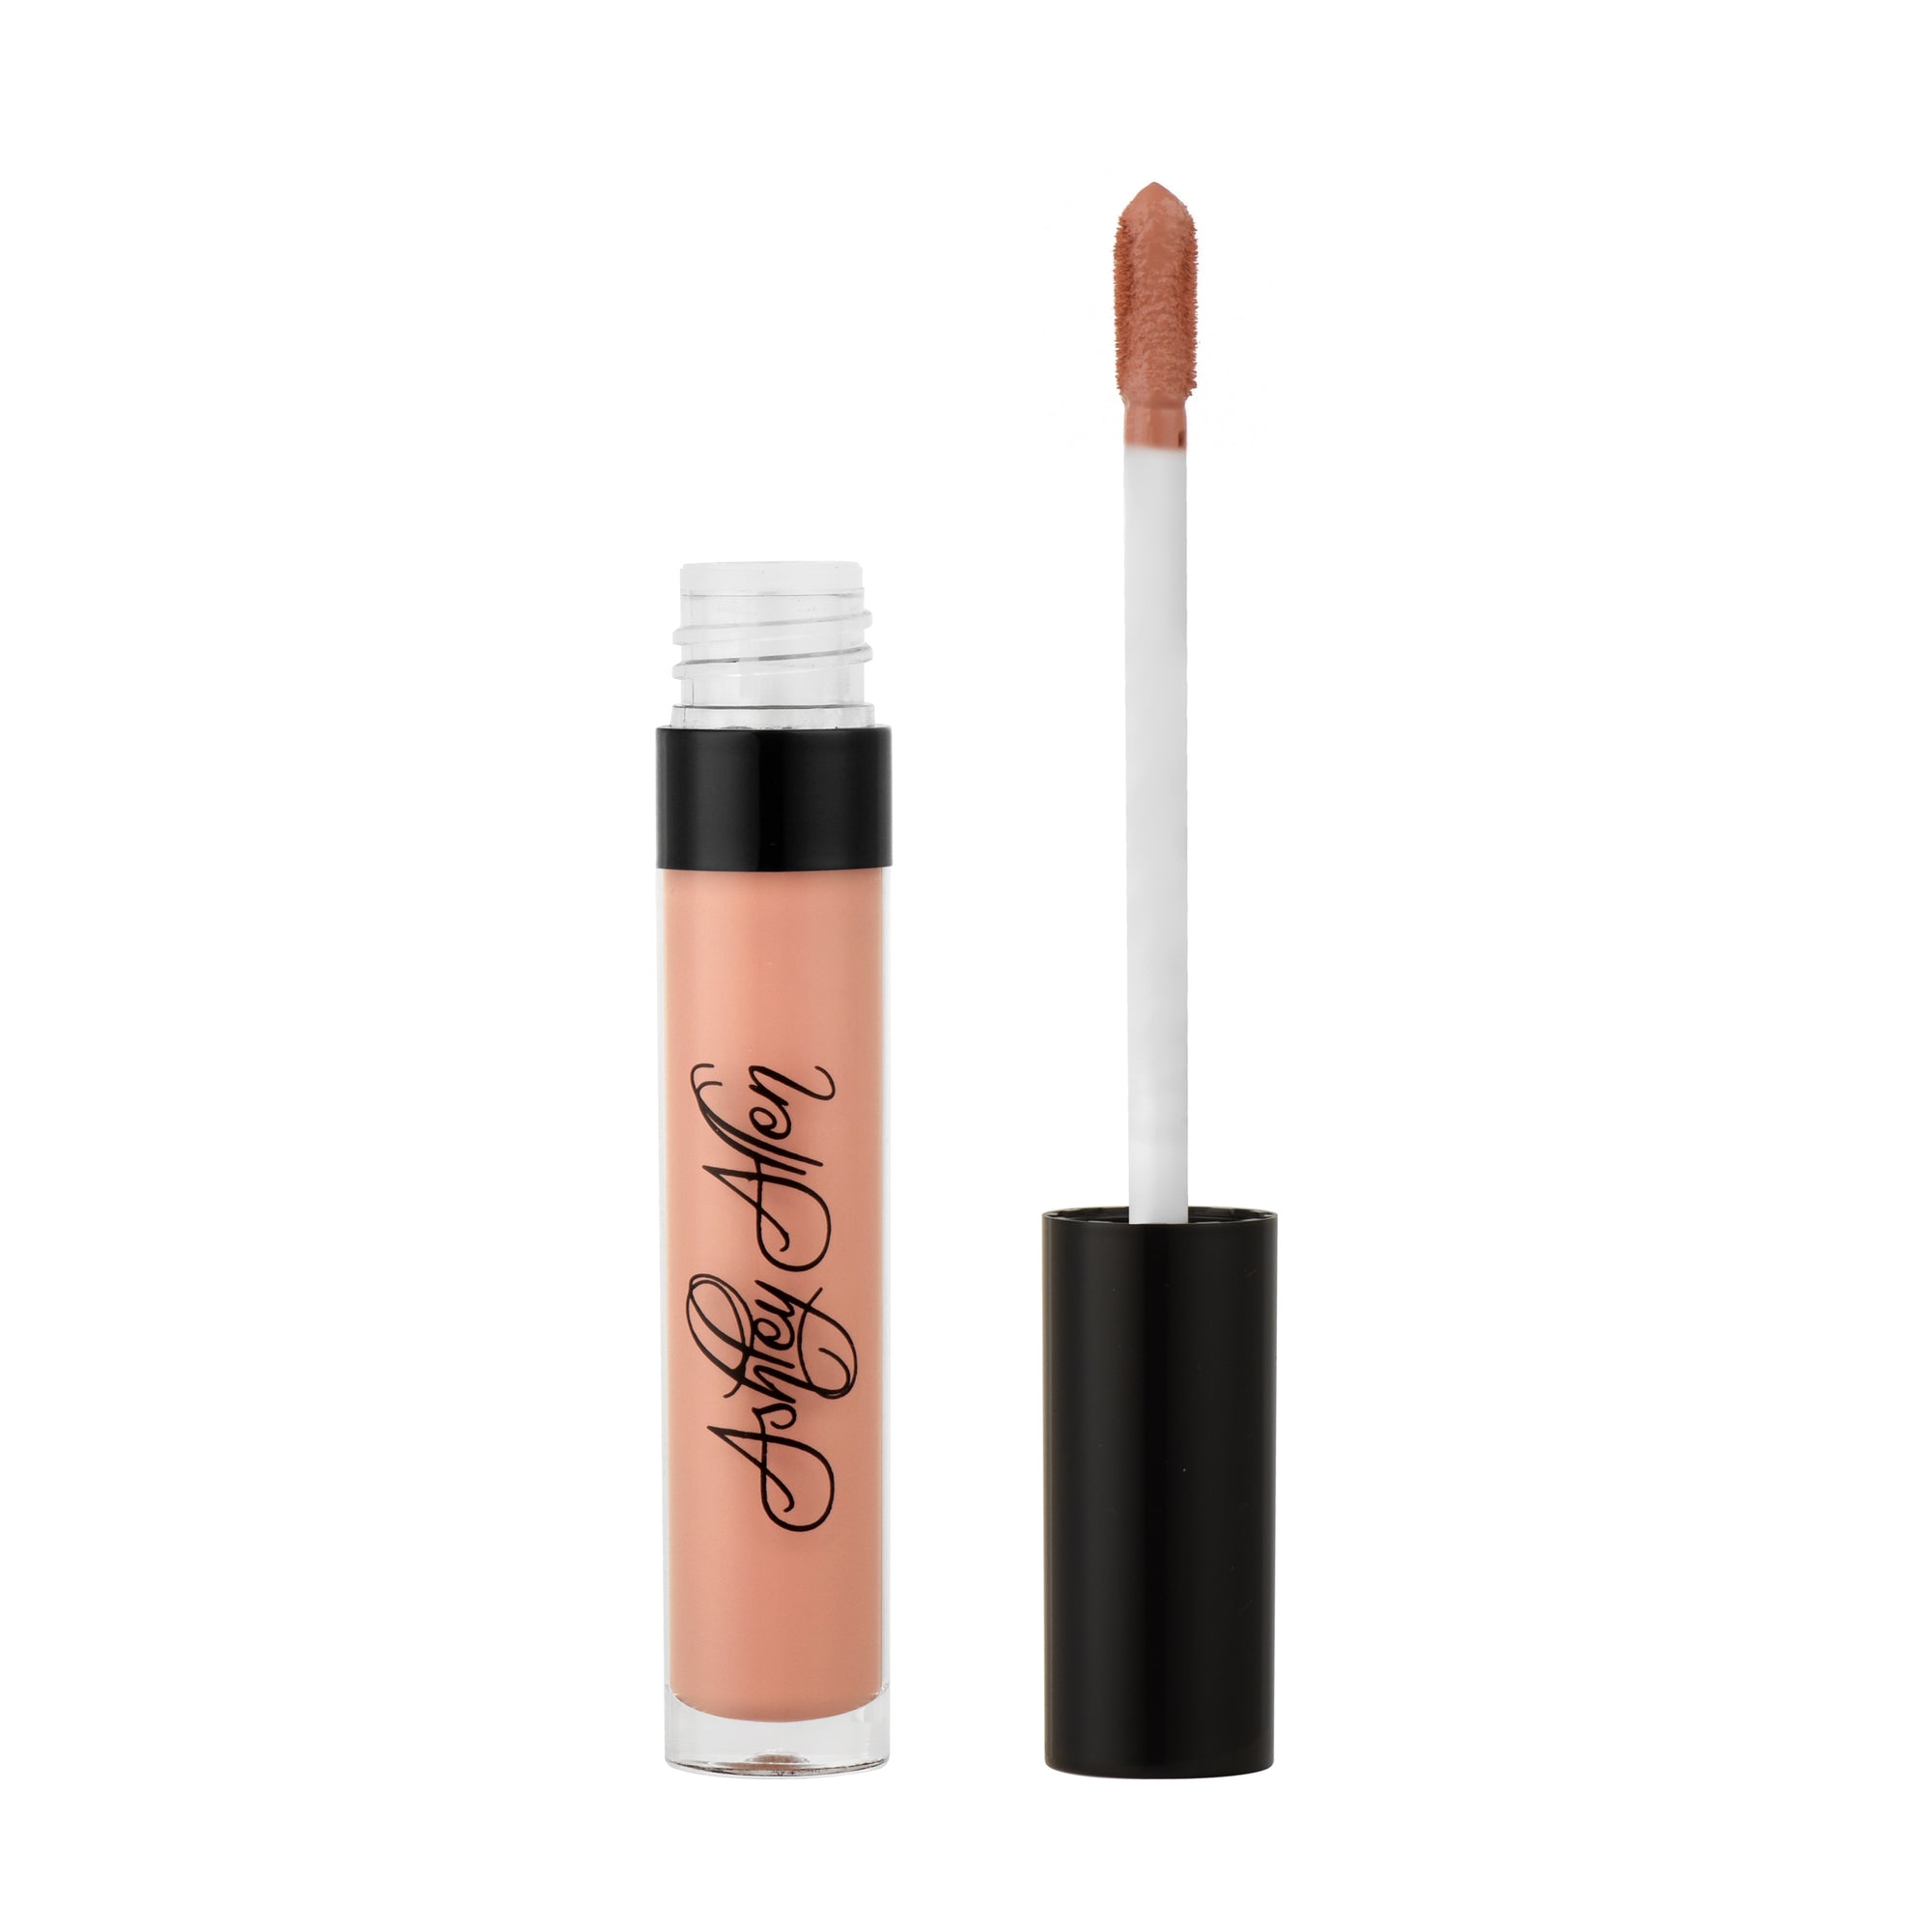 Matte Lip - N022 (50% OFF) will be $12.50 activated at checkout